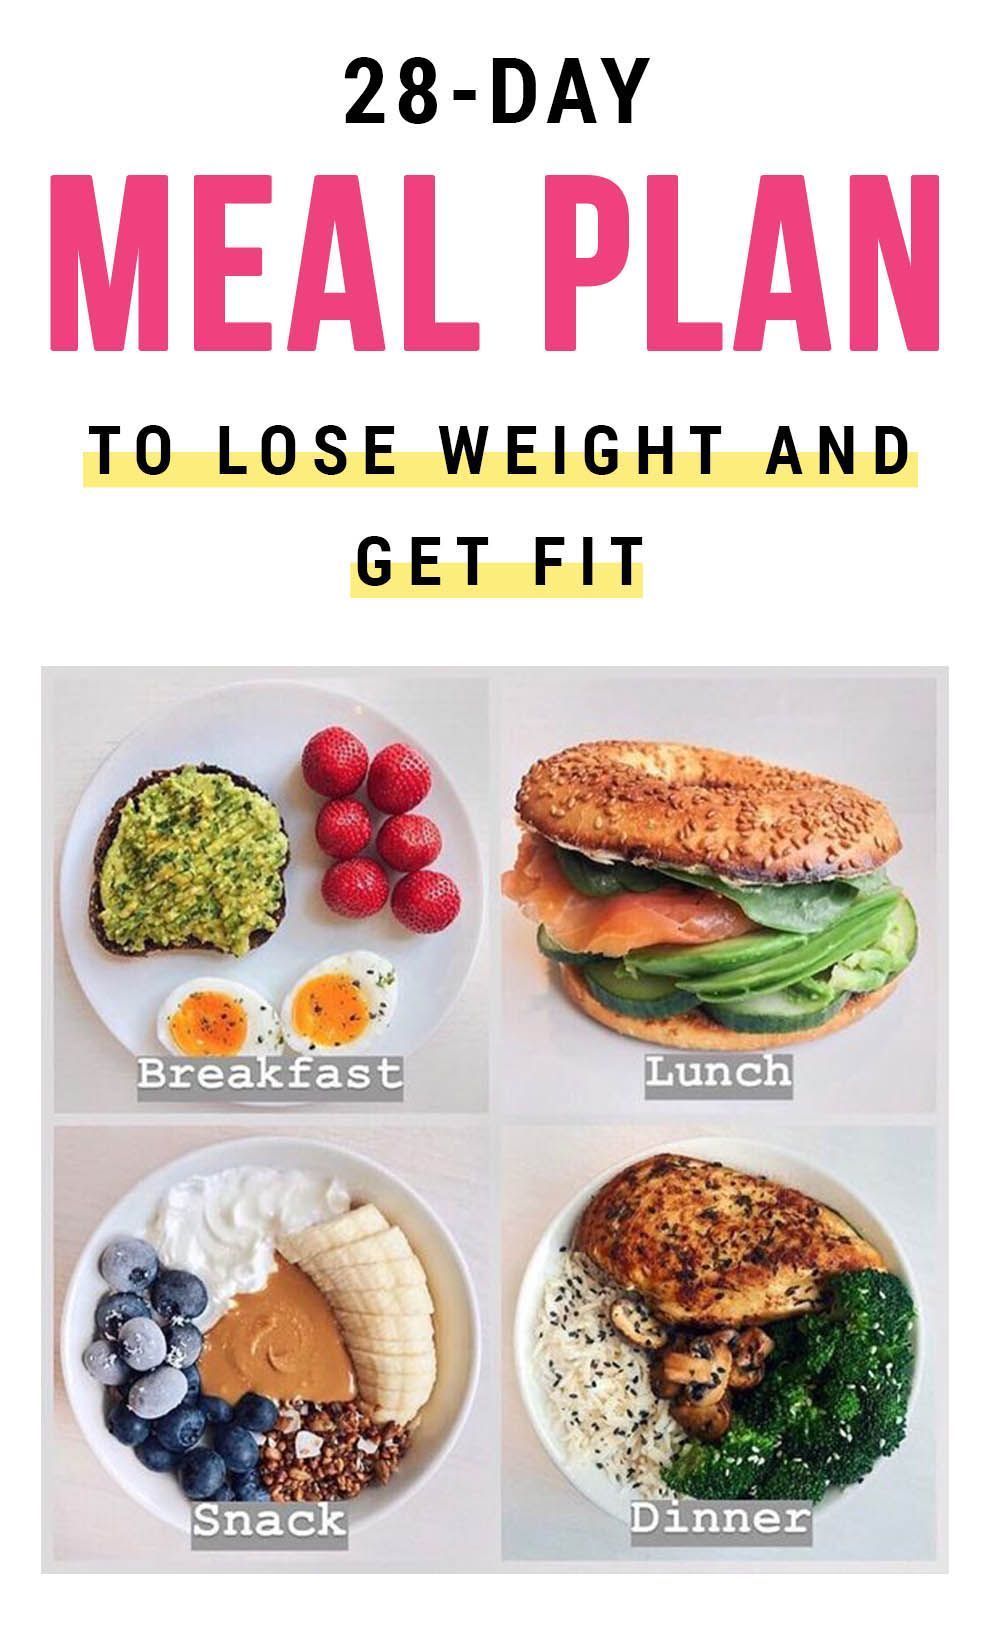 12 fitness Meals losing weight ideas